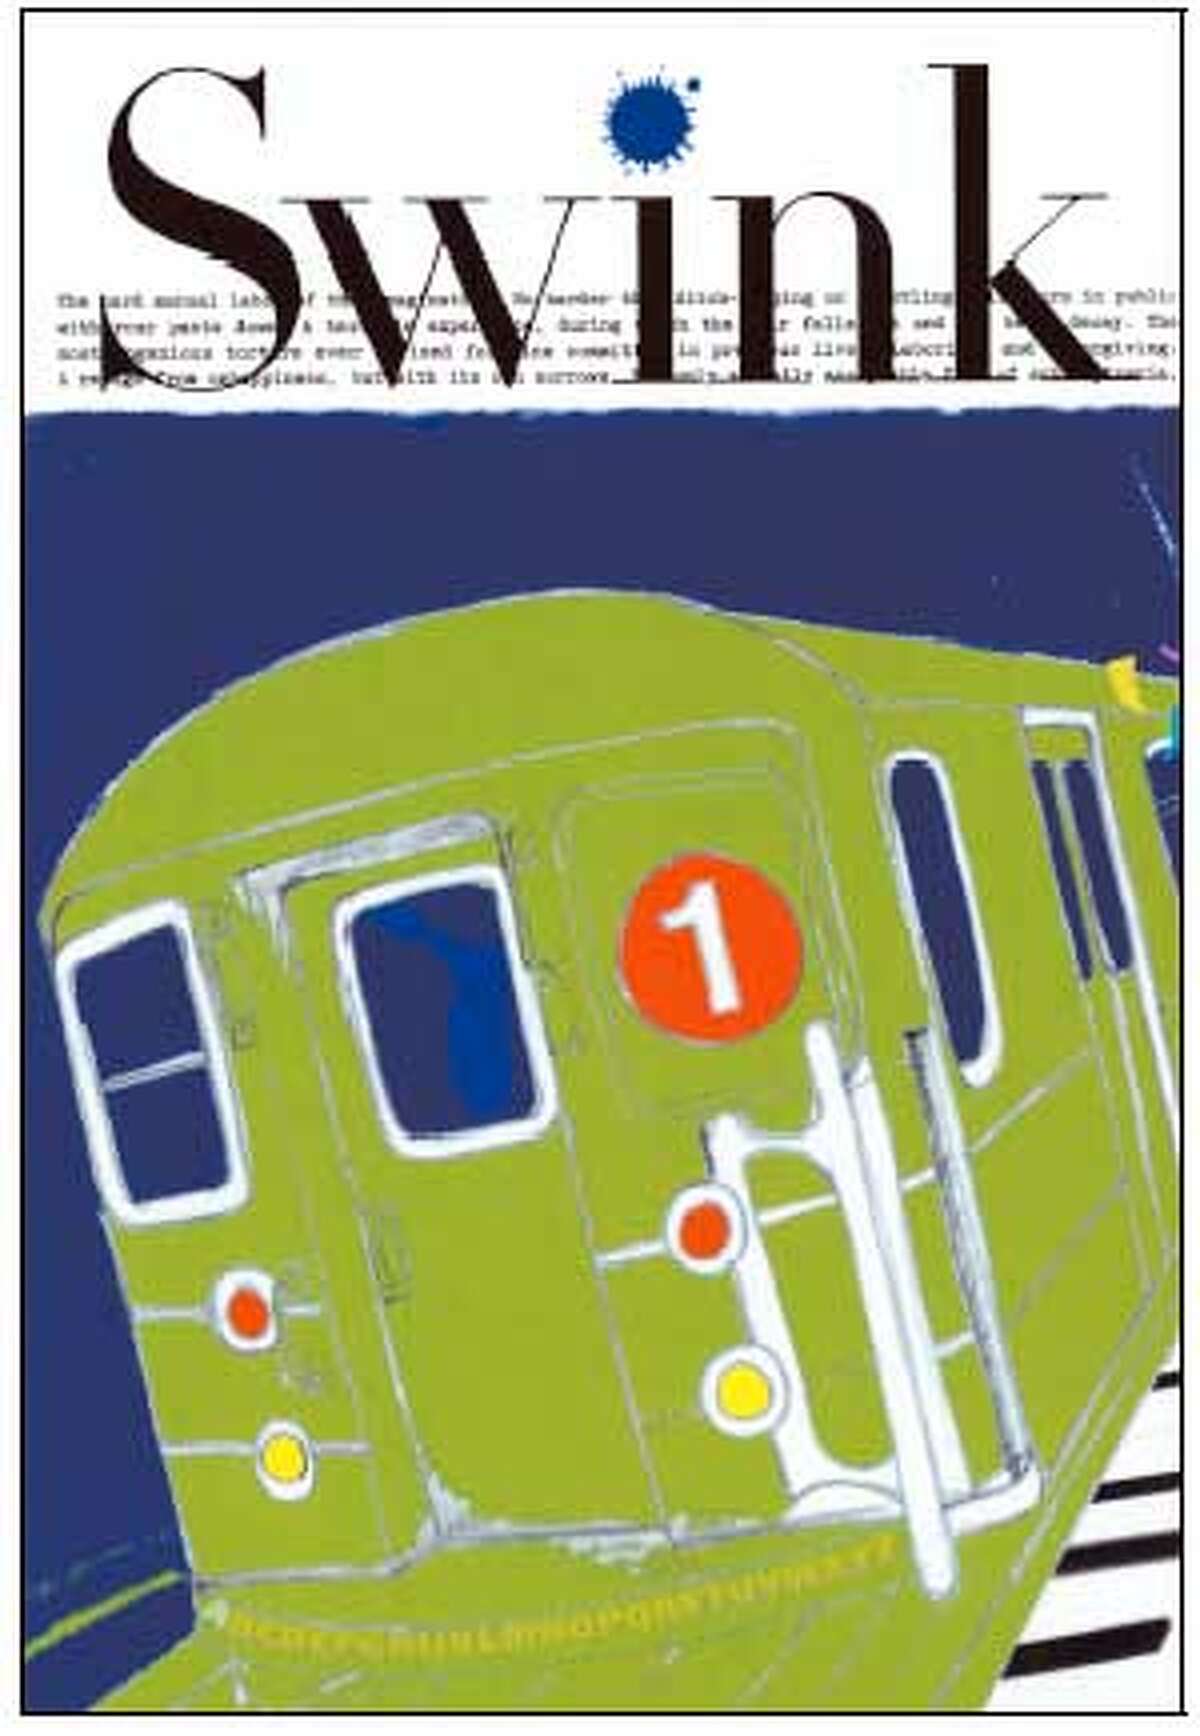 Swink, the newest of the mags, is named for a slang term meaning toil, and is notable for its literary gimmicks.